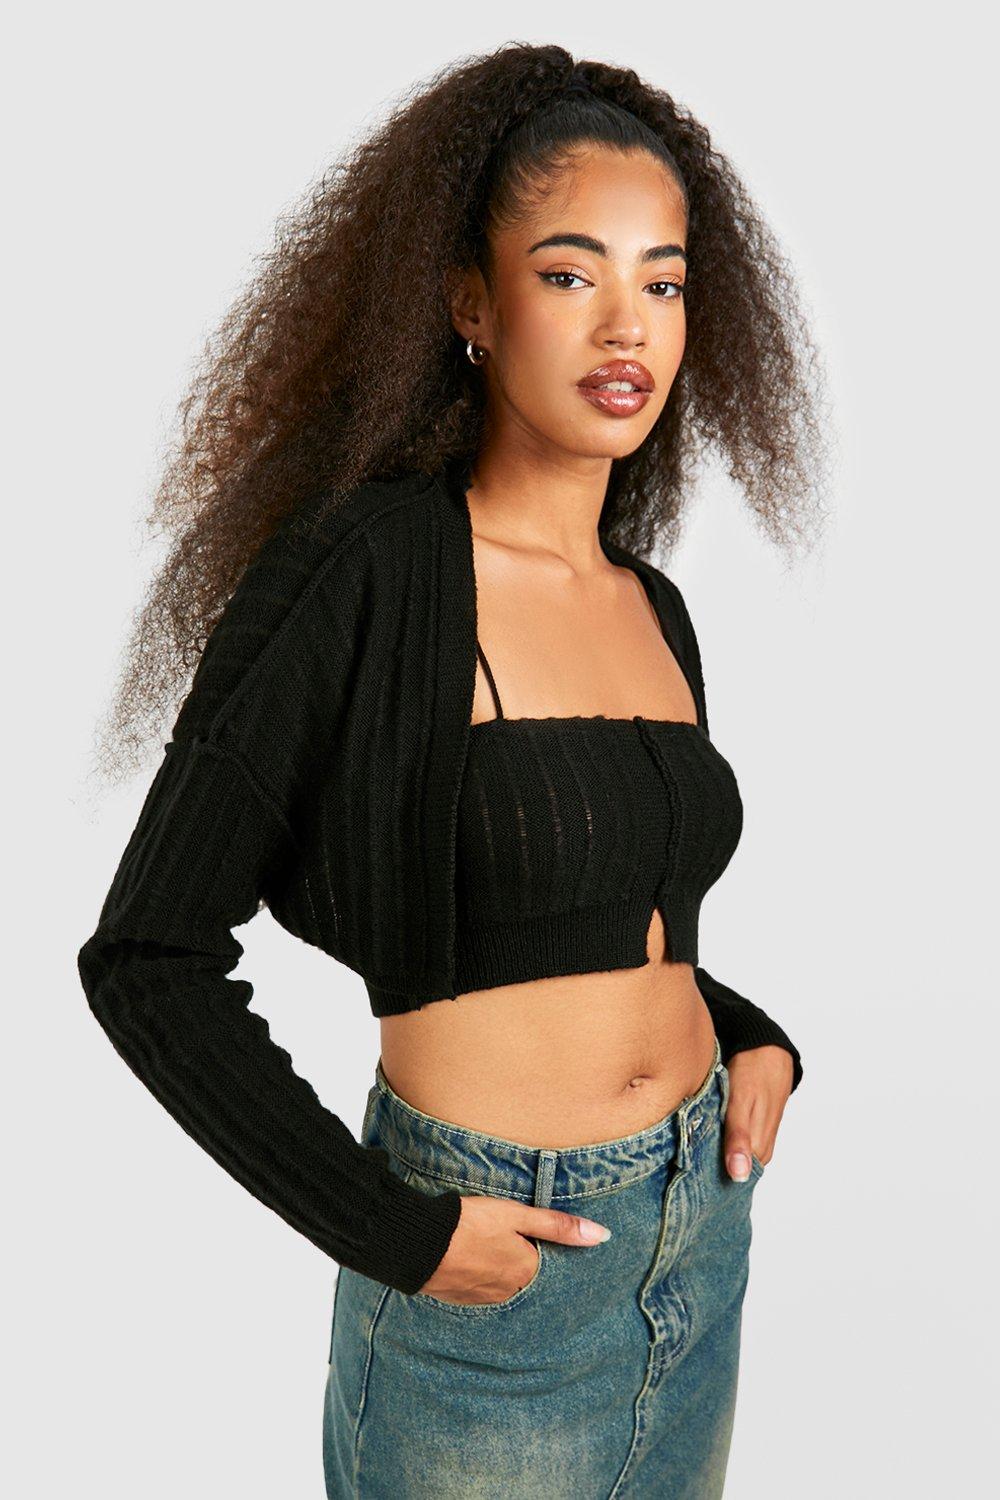 ASYOU knitted stripe crochet bralet co-ord with embroidery in multi